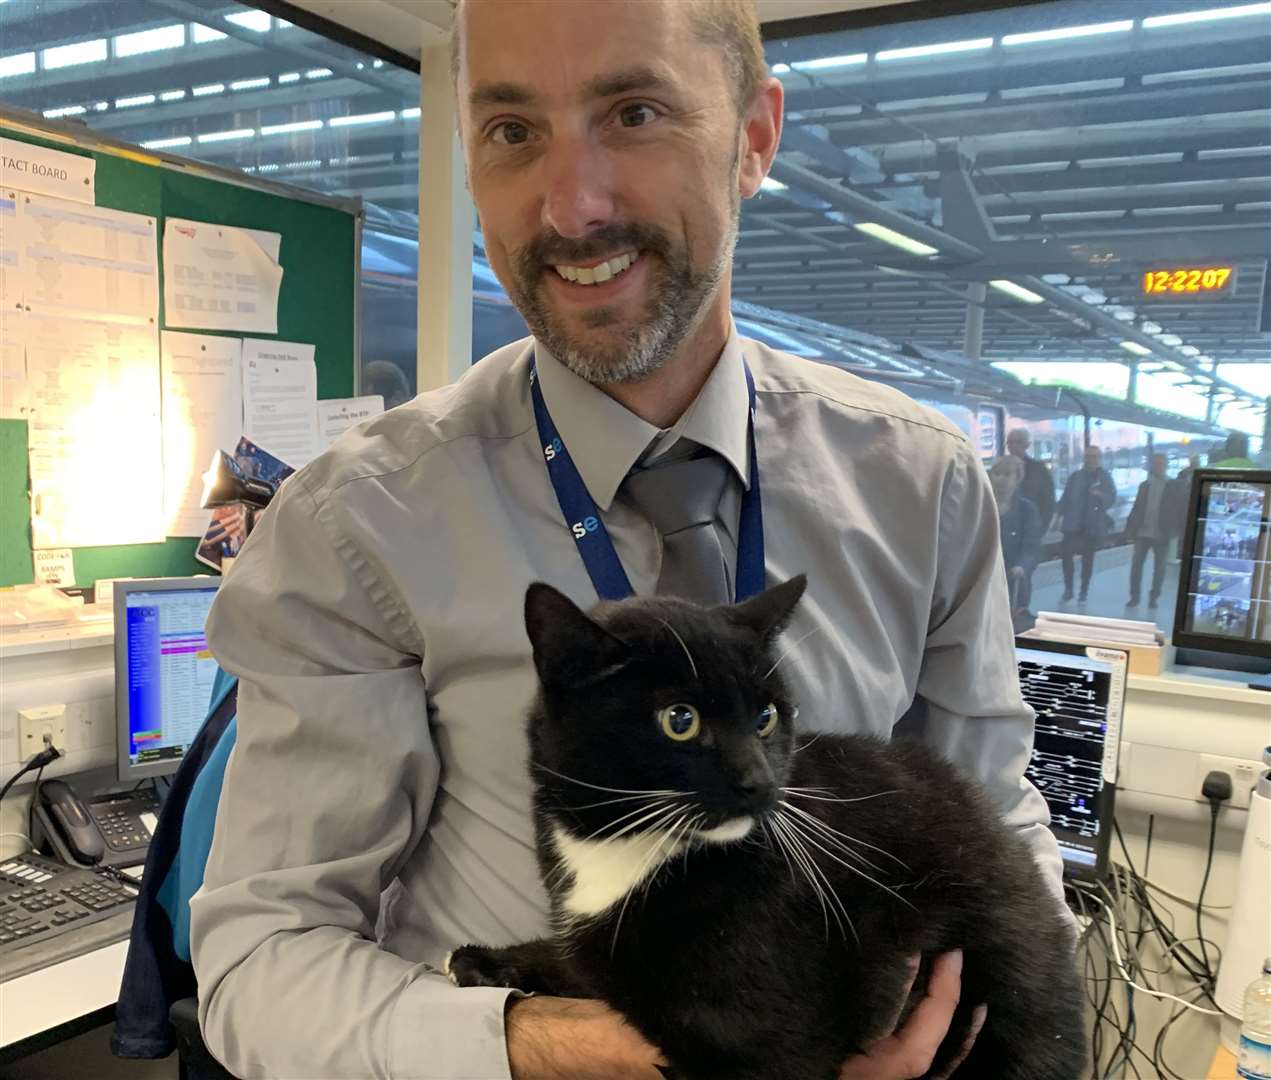 Southeastern station manager for St Pancras, Steve Butcher, with the cat (10362814)